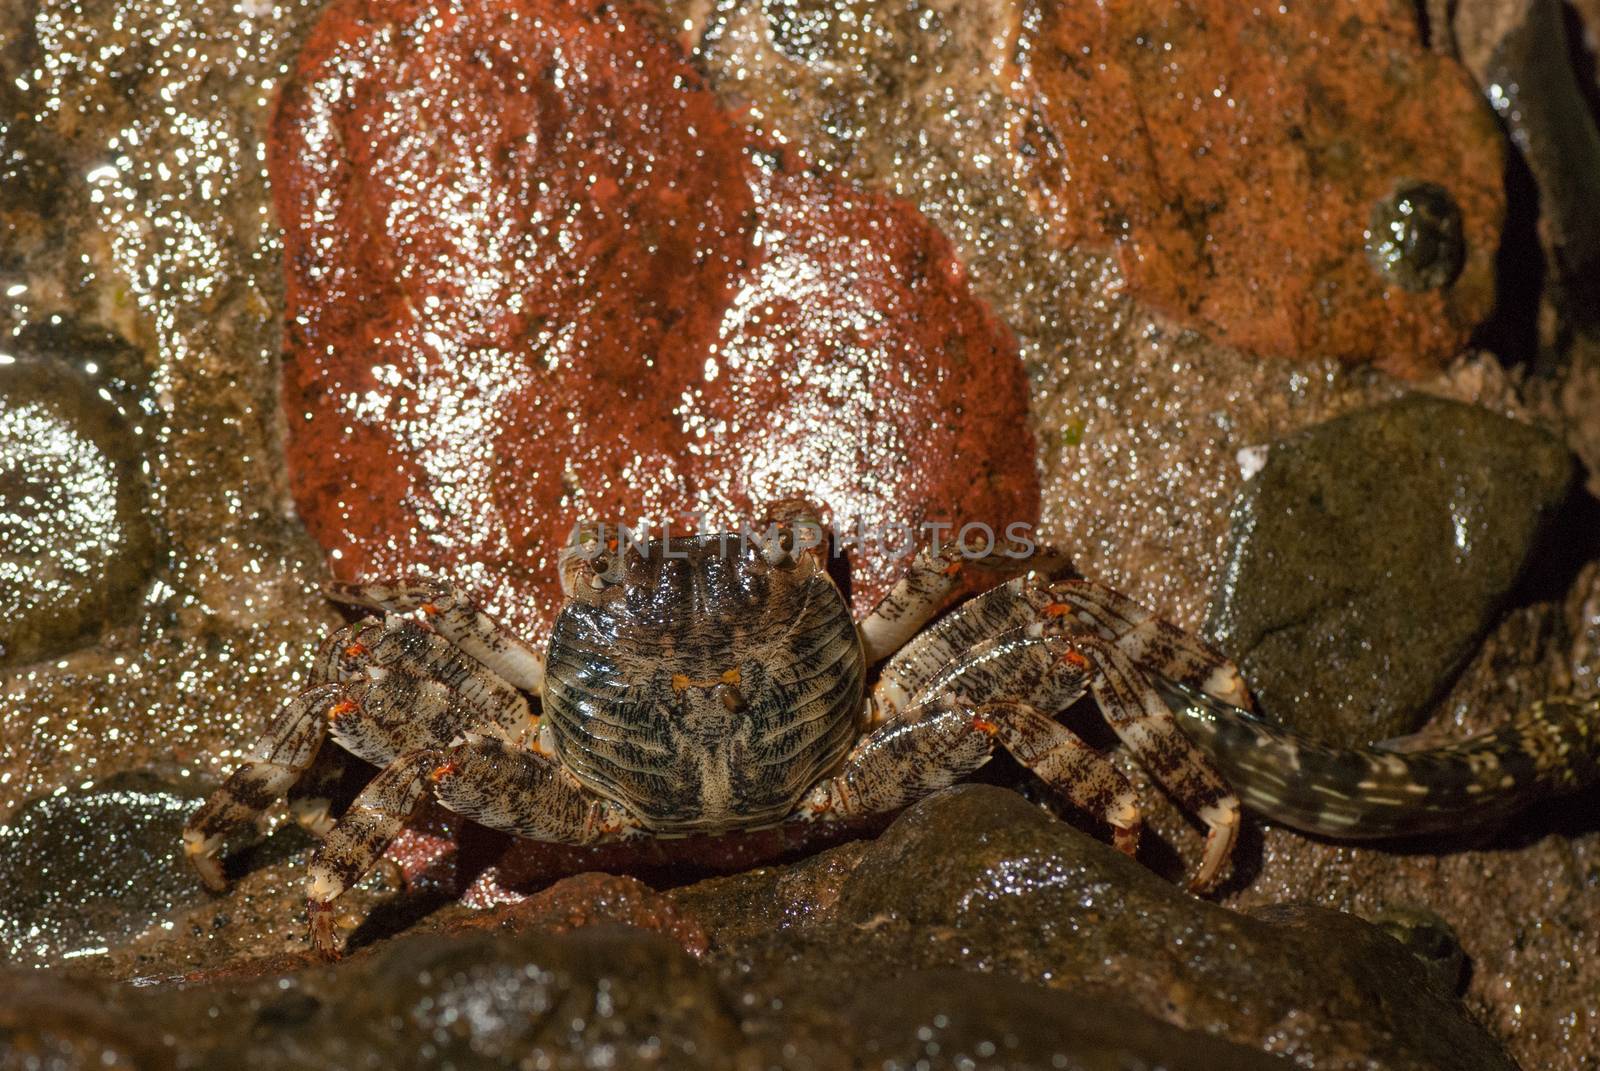 Wet sea crab on the stone at night by skrotov